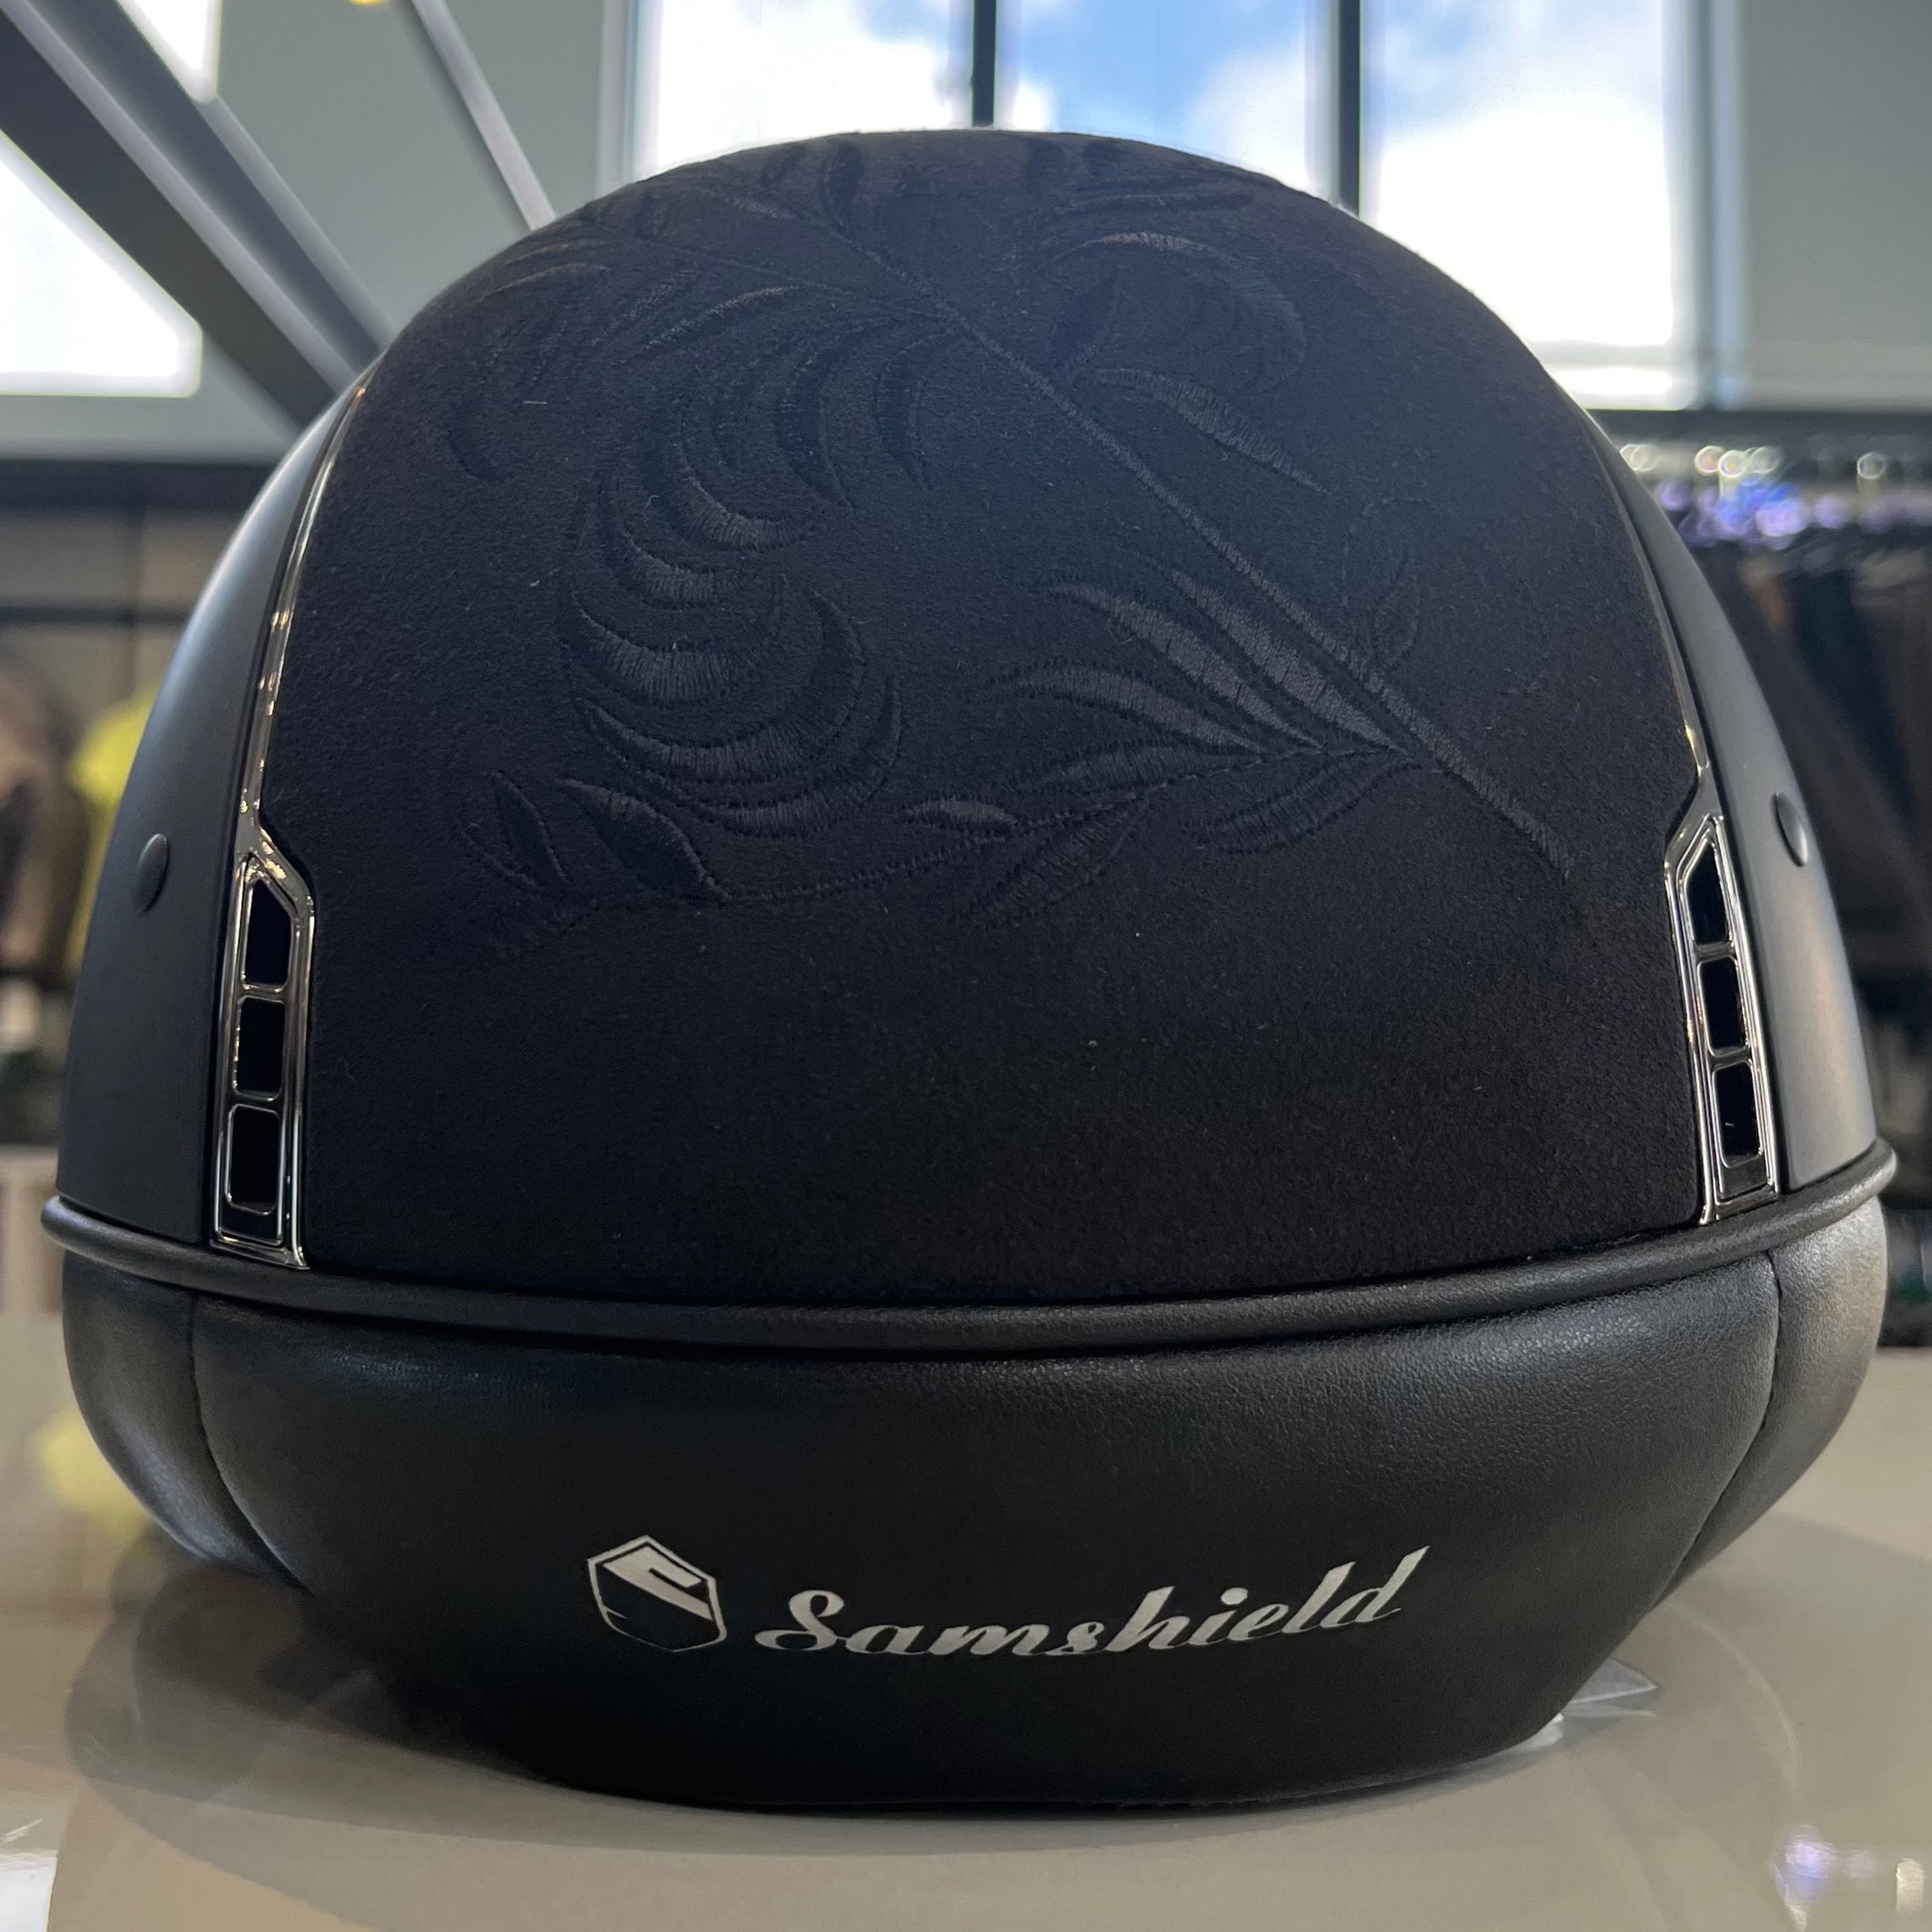 Samshield MissShield 1.0 Black alcantara flower embroidery M- in stock and ready to ship!